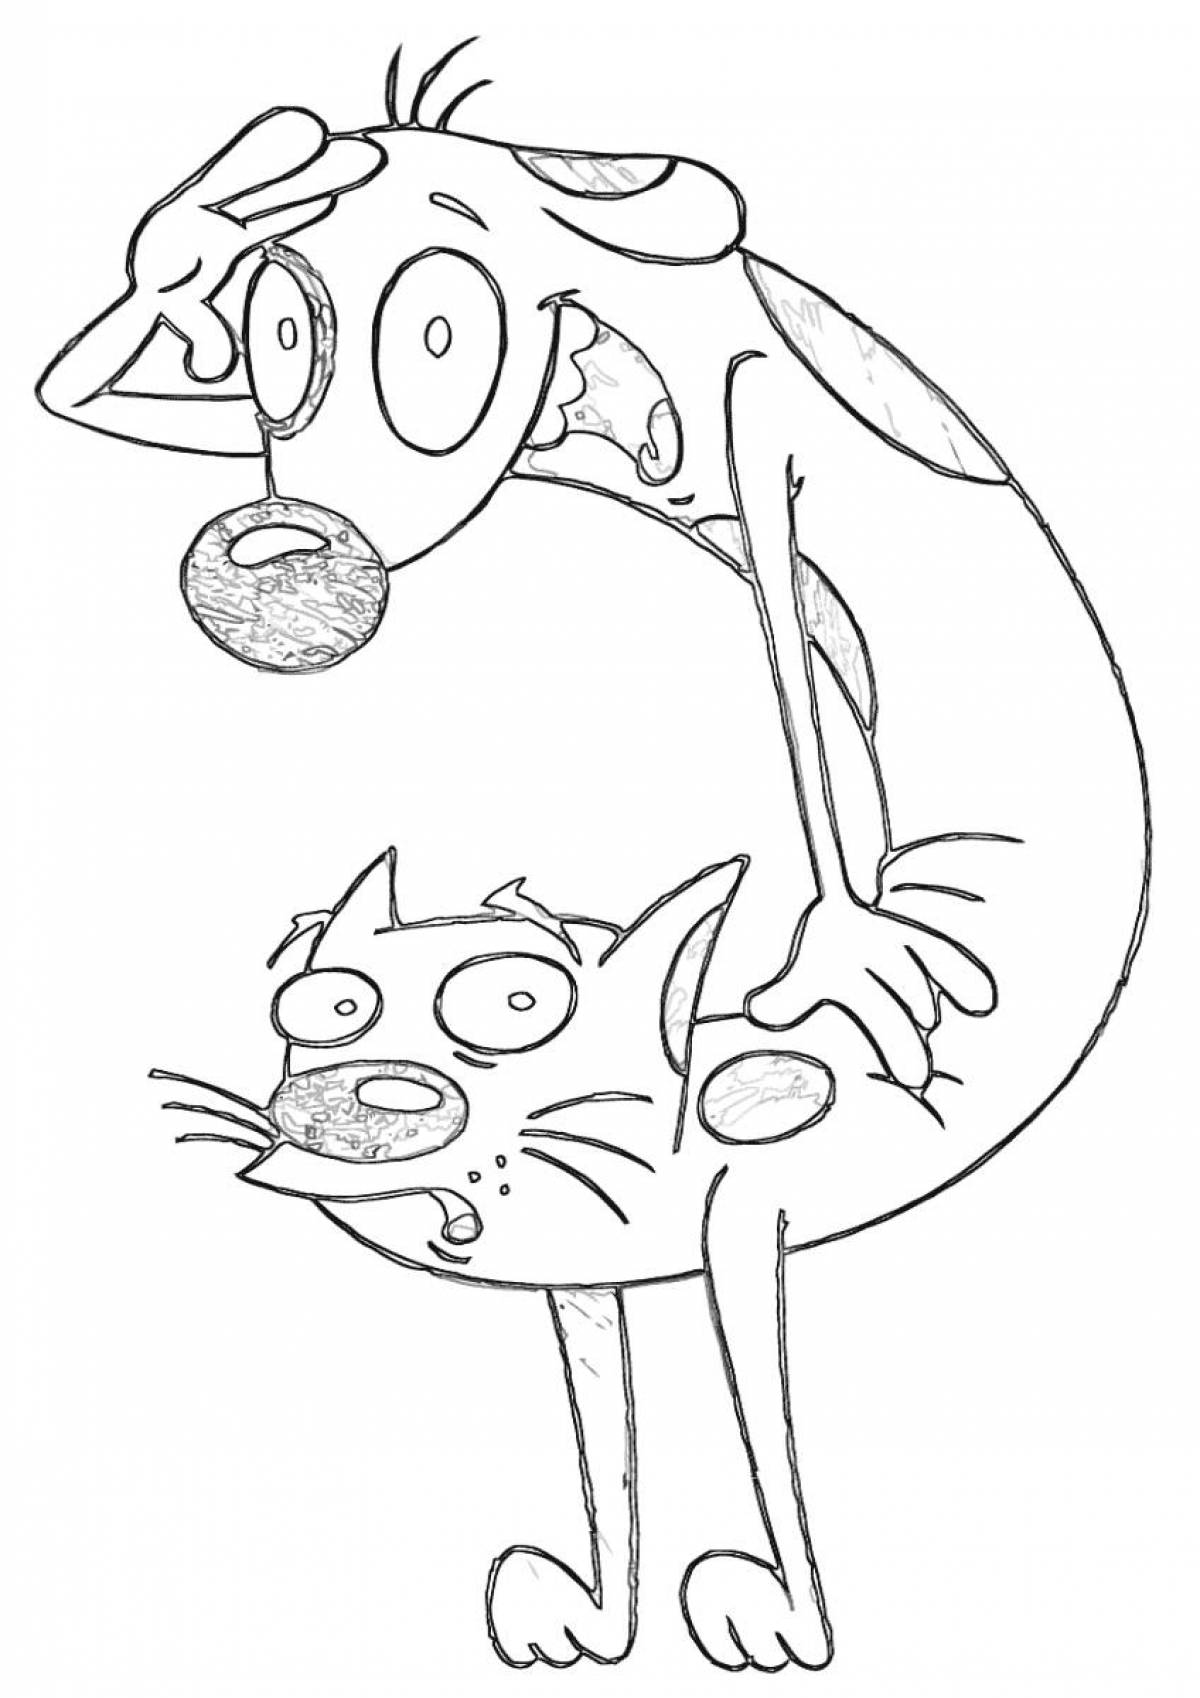 Coloring page of a sociable cat dog